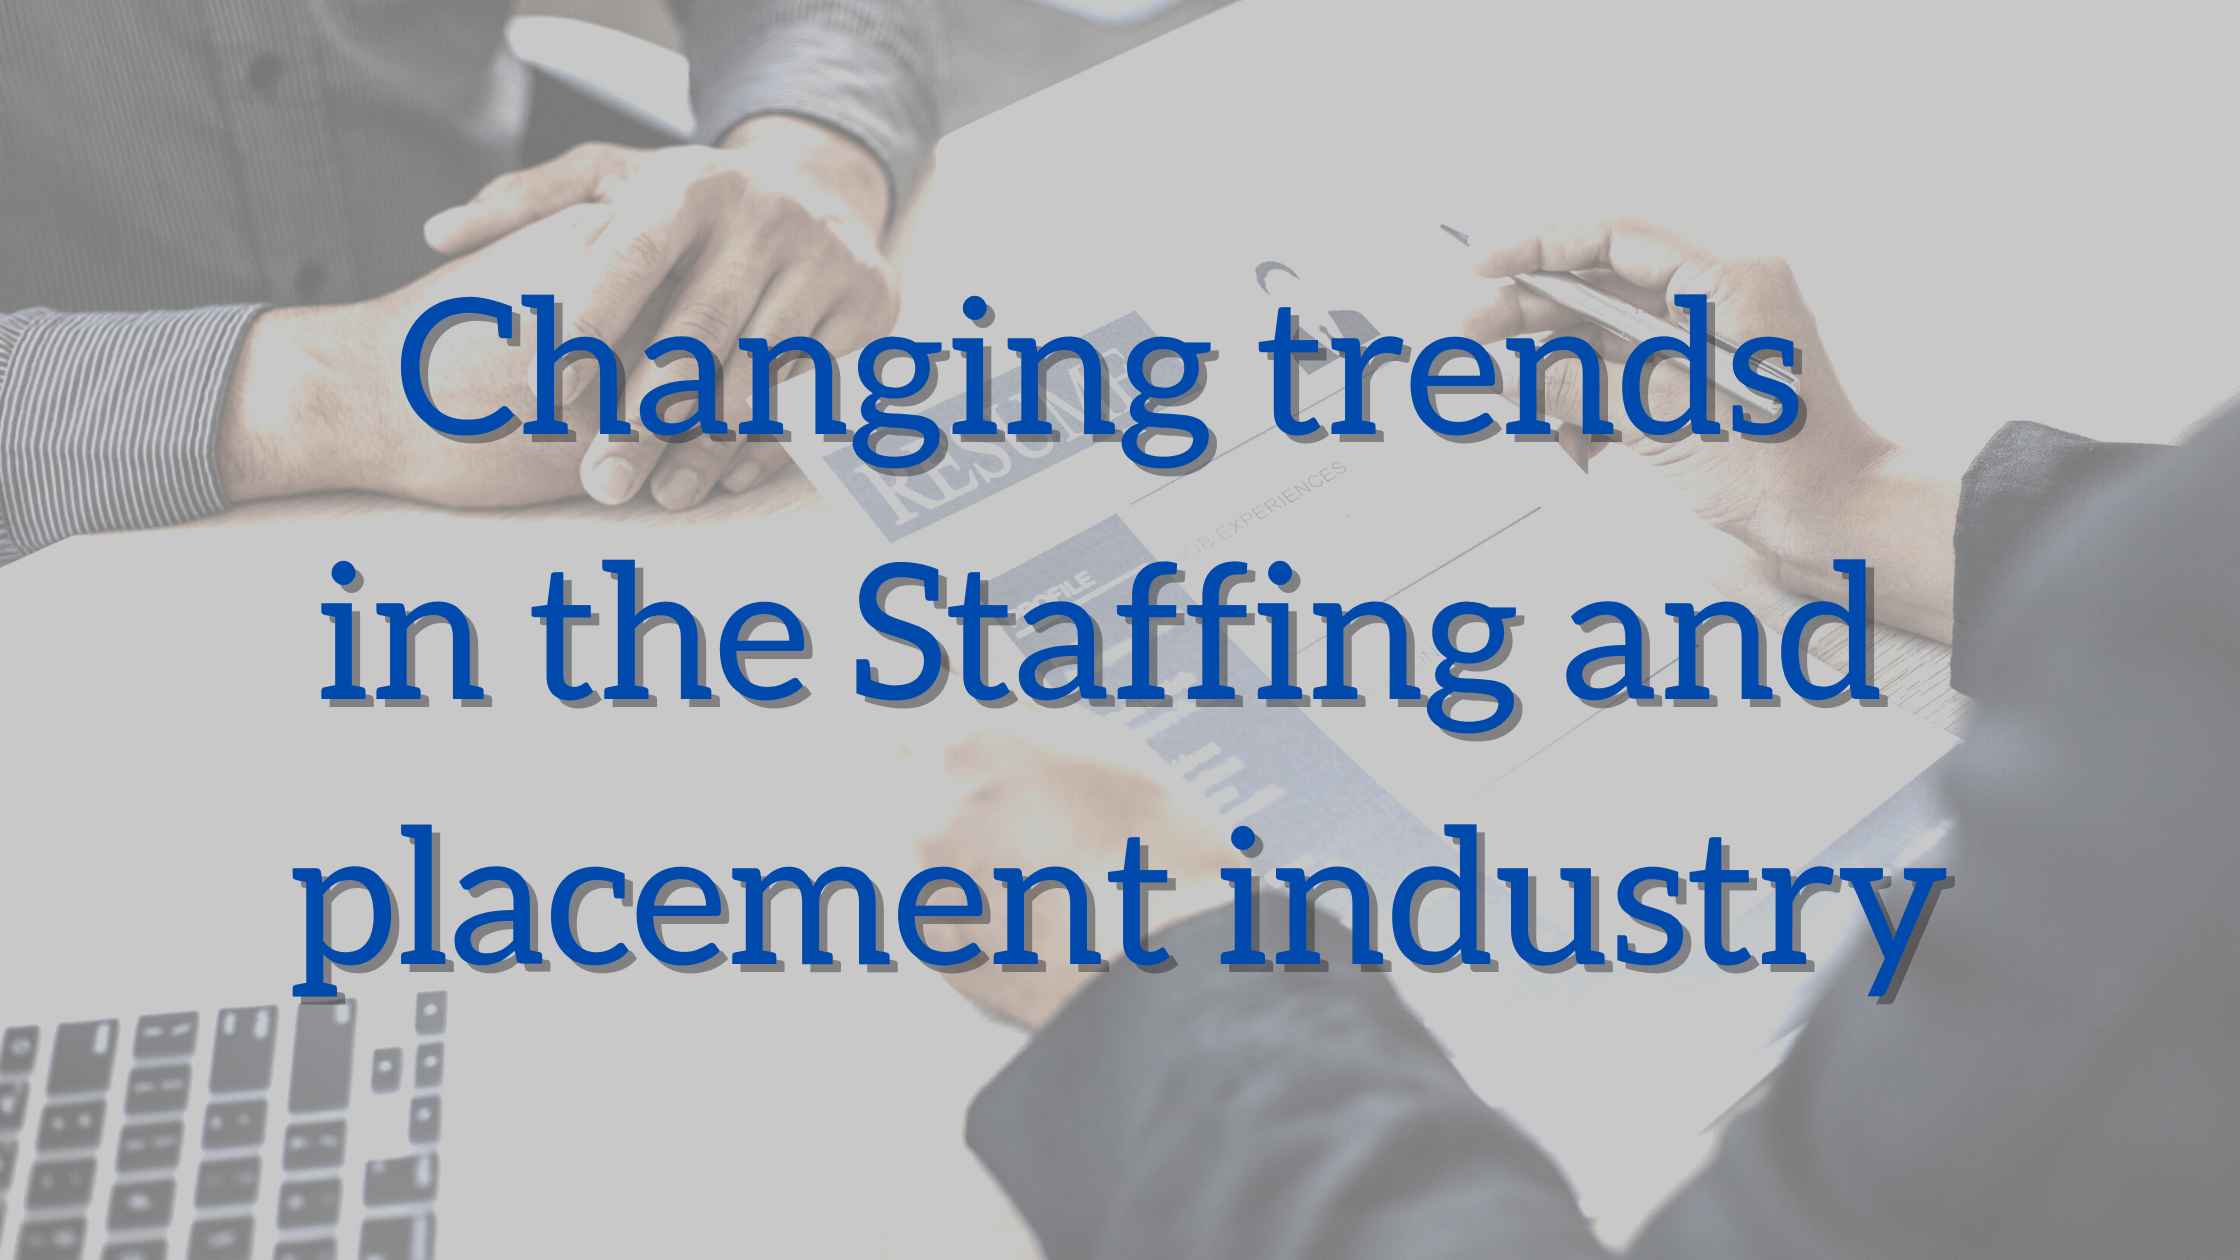 Changing trends in the Staffing and placement industry